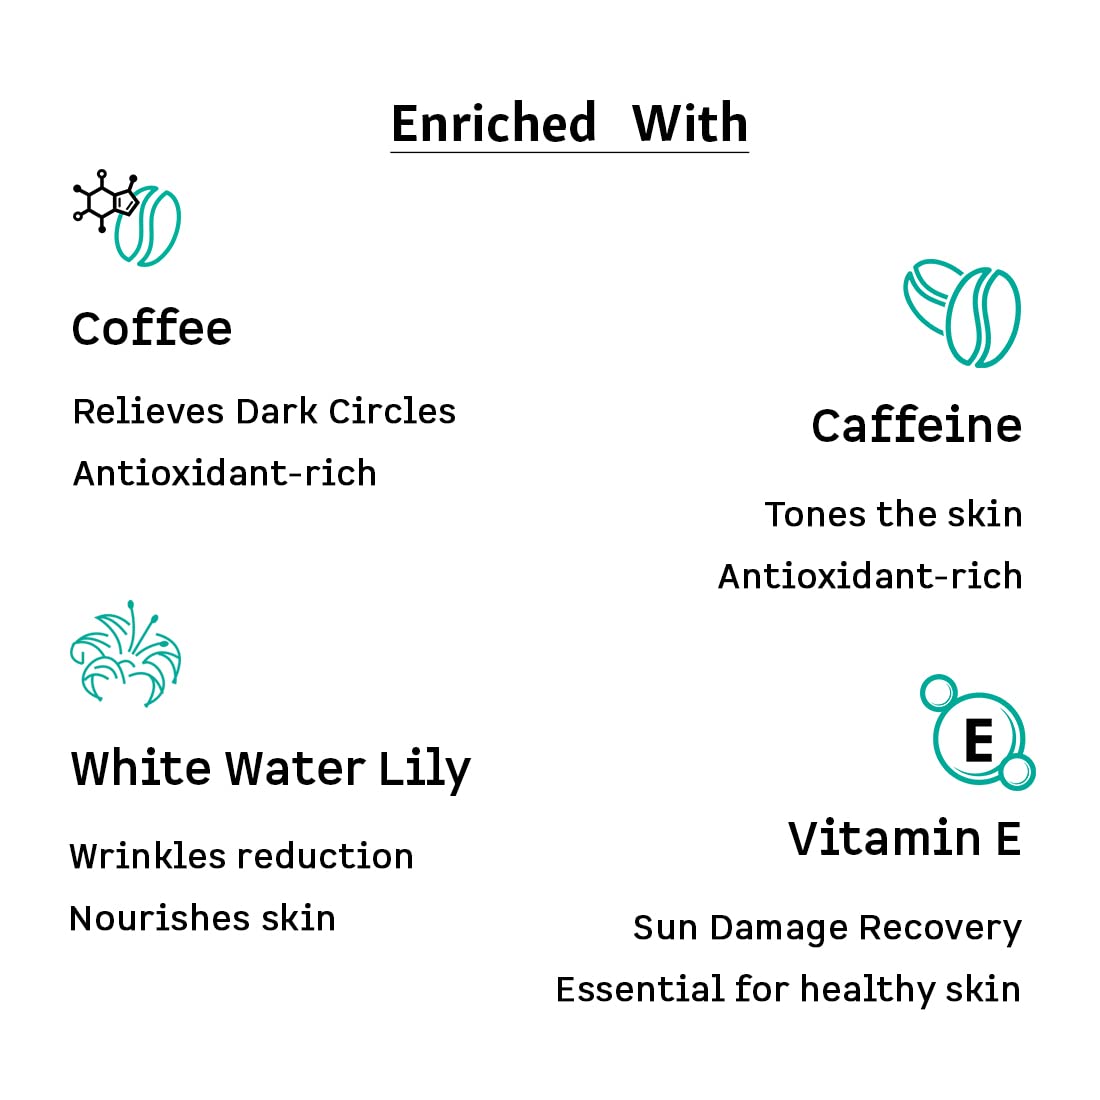 MCaffeine Coffee Under Eye Cream for Dark Circles for Women &amp; Men with Free Eye Roller | 94% Reduction in Dark Circles | Reduces Wrinkles, Puffiness and Fine Lines | With Vitamin E and White Water Lily | 30m